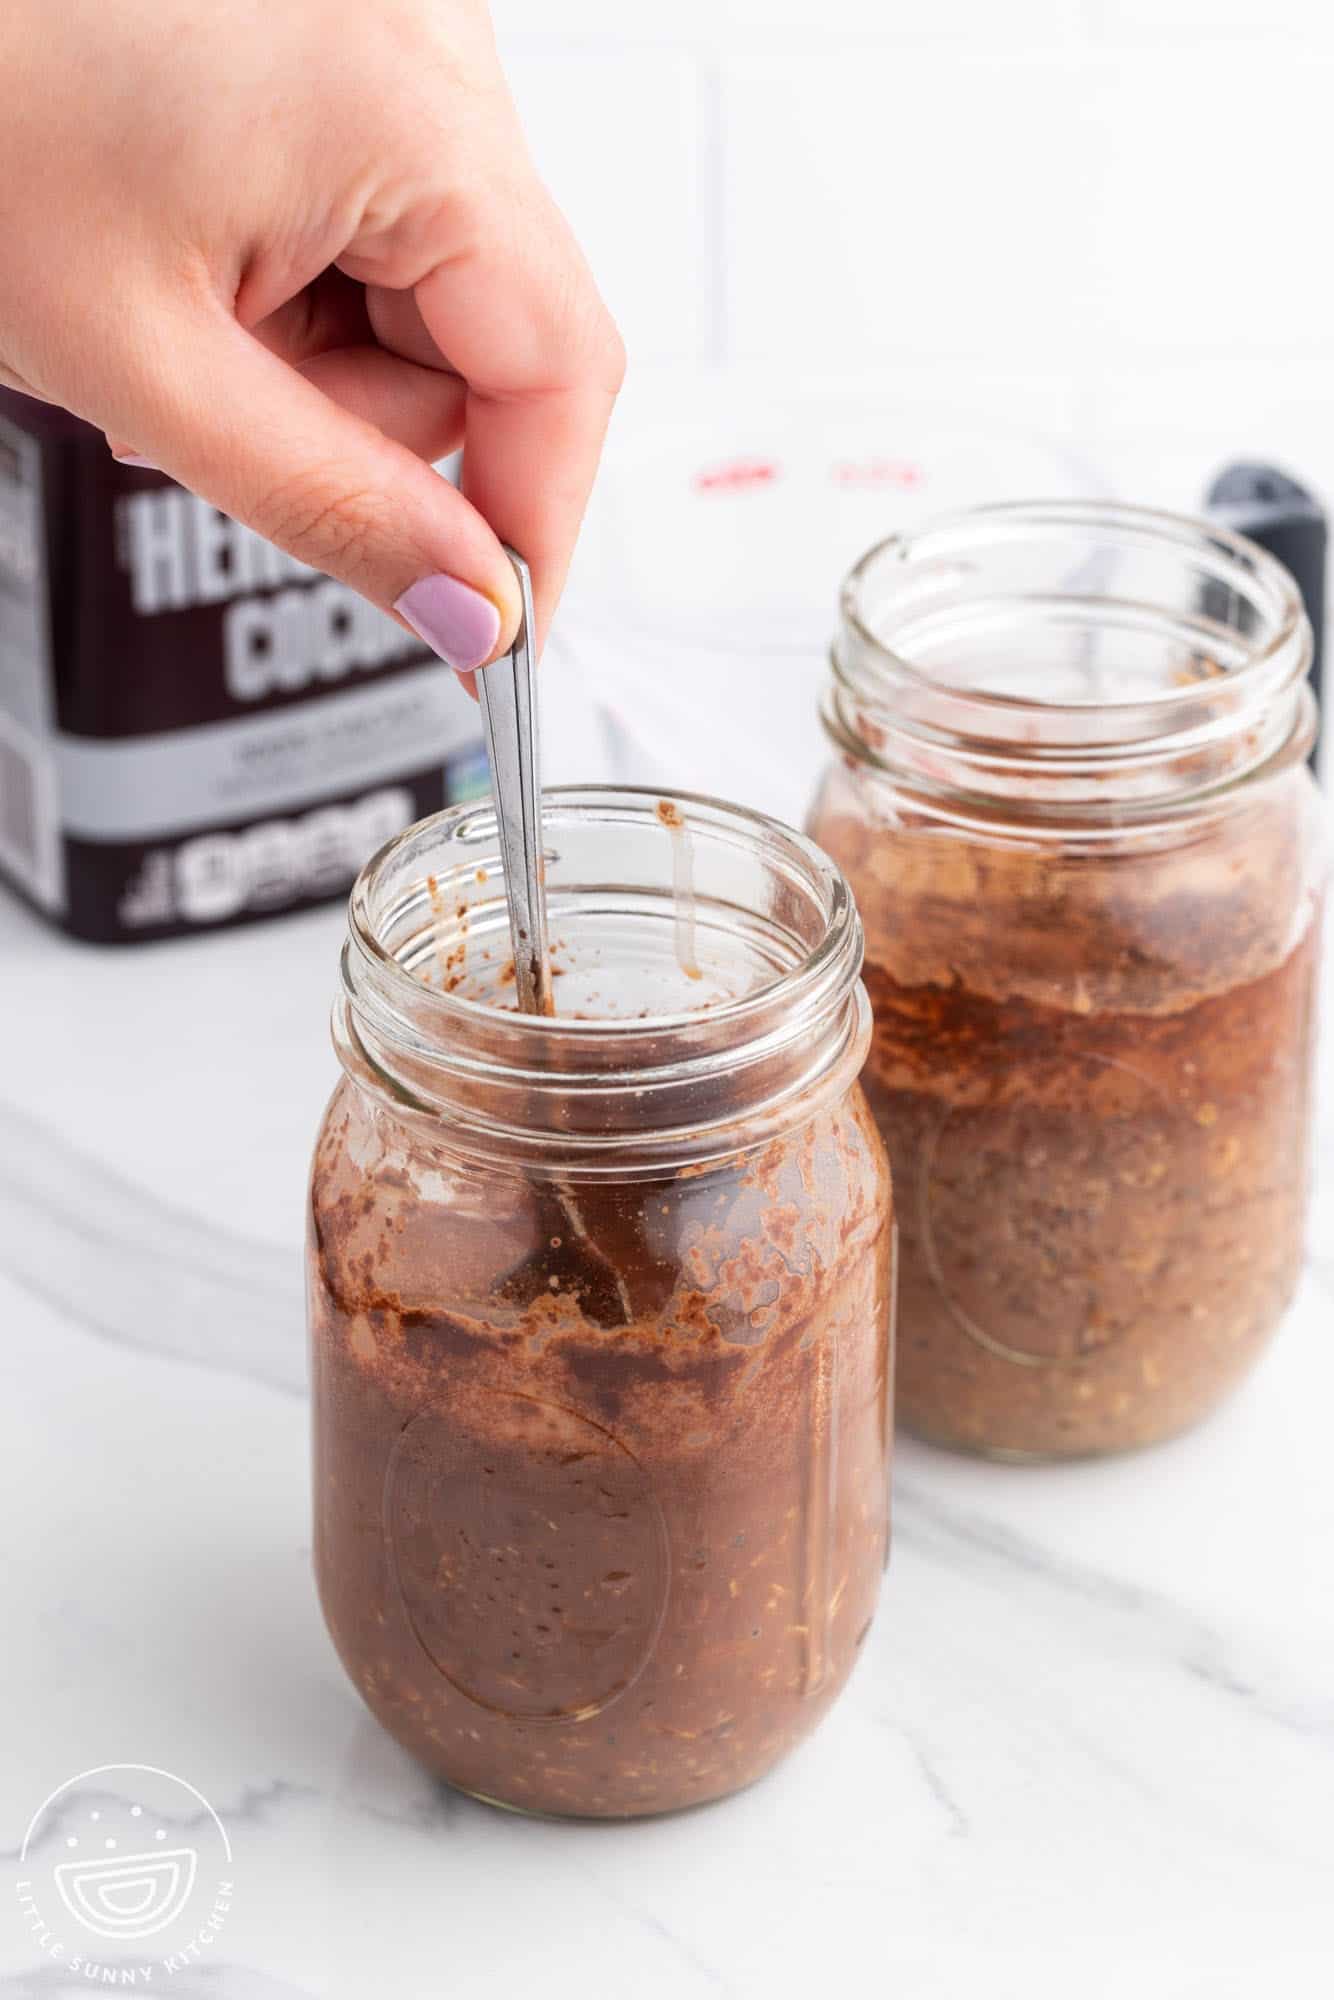 two jars of chocolate overnight oats. a hand is stirring one of them.